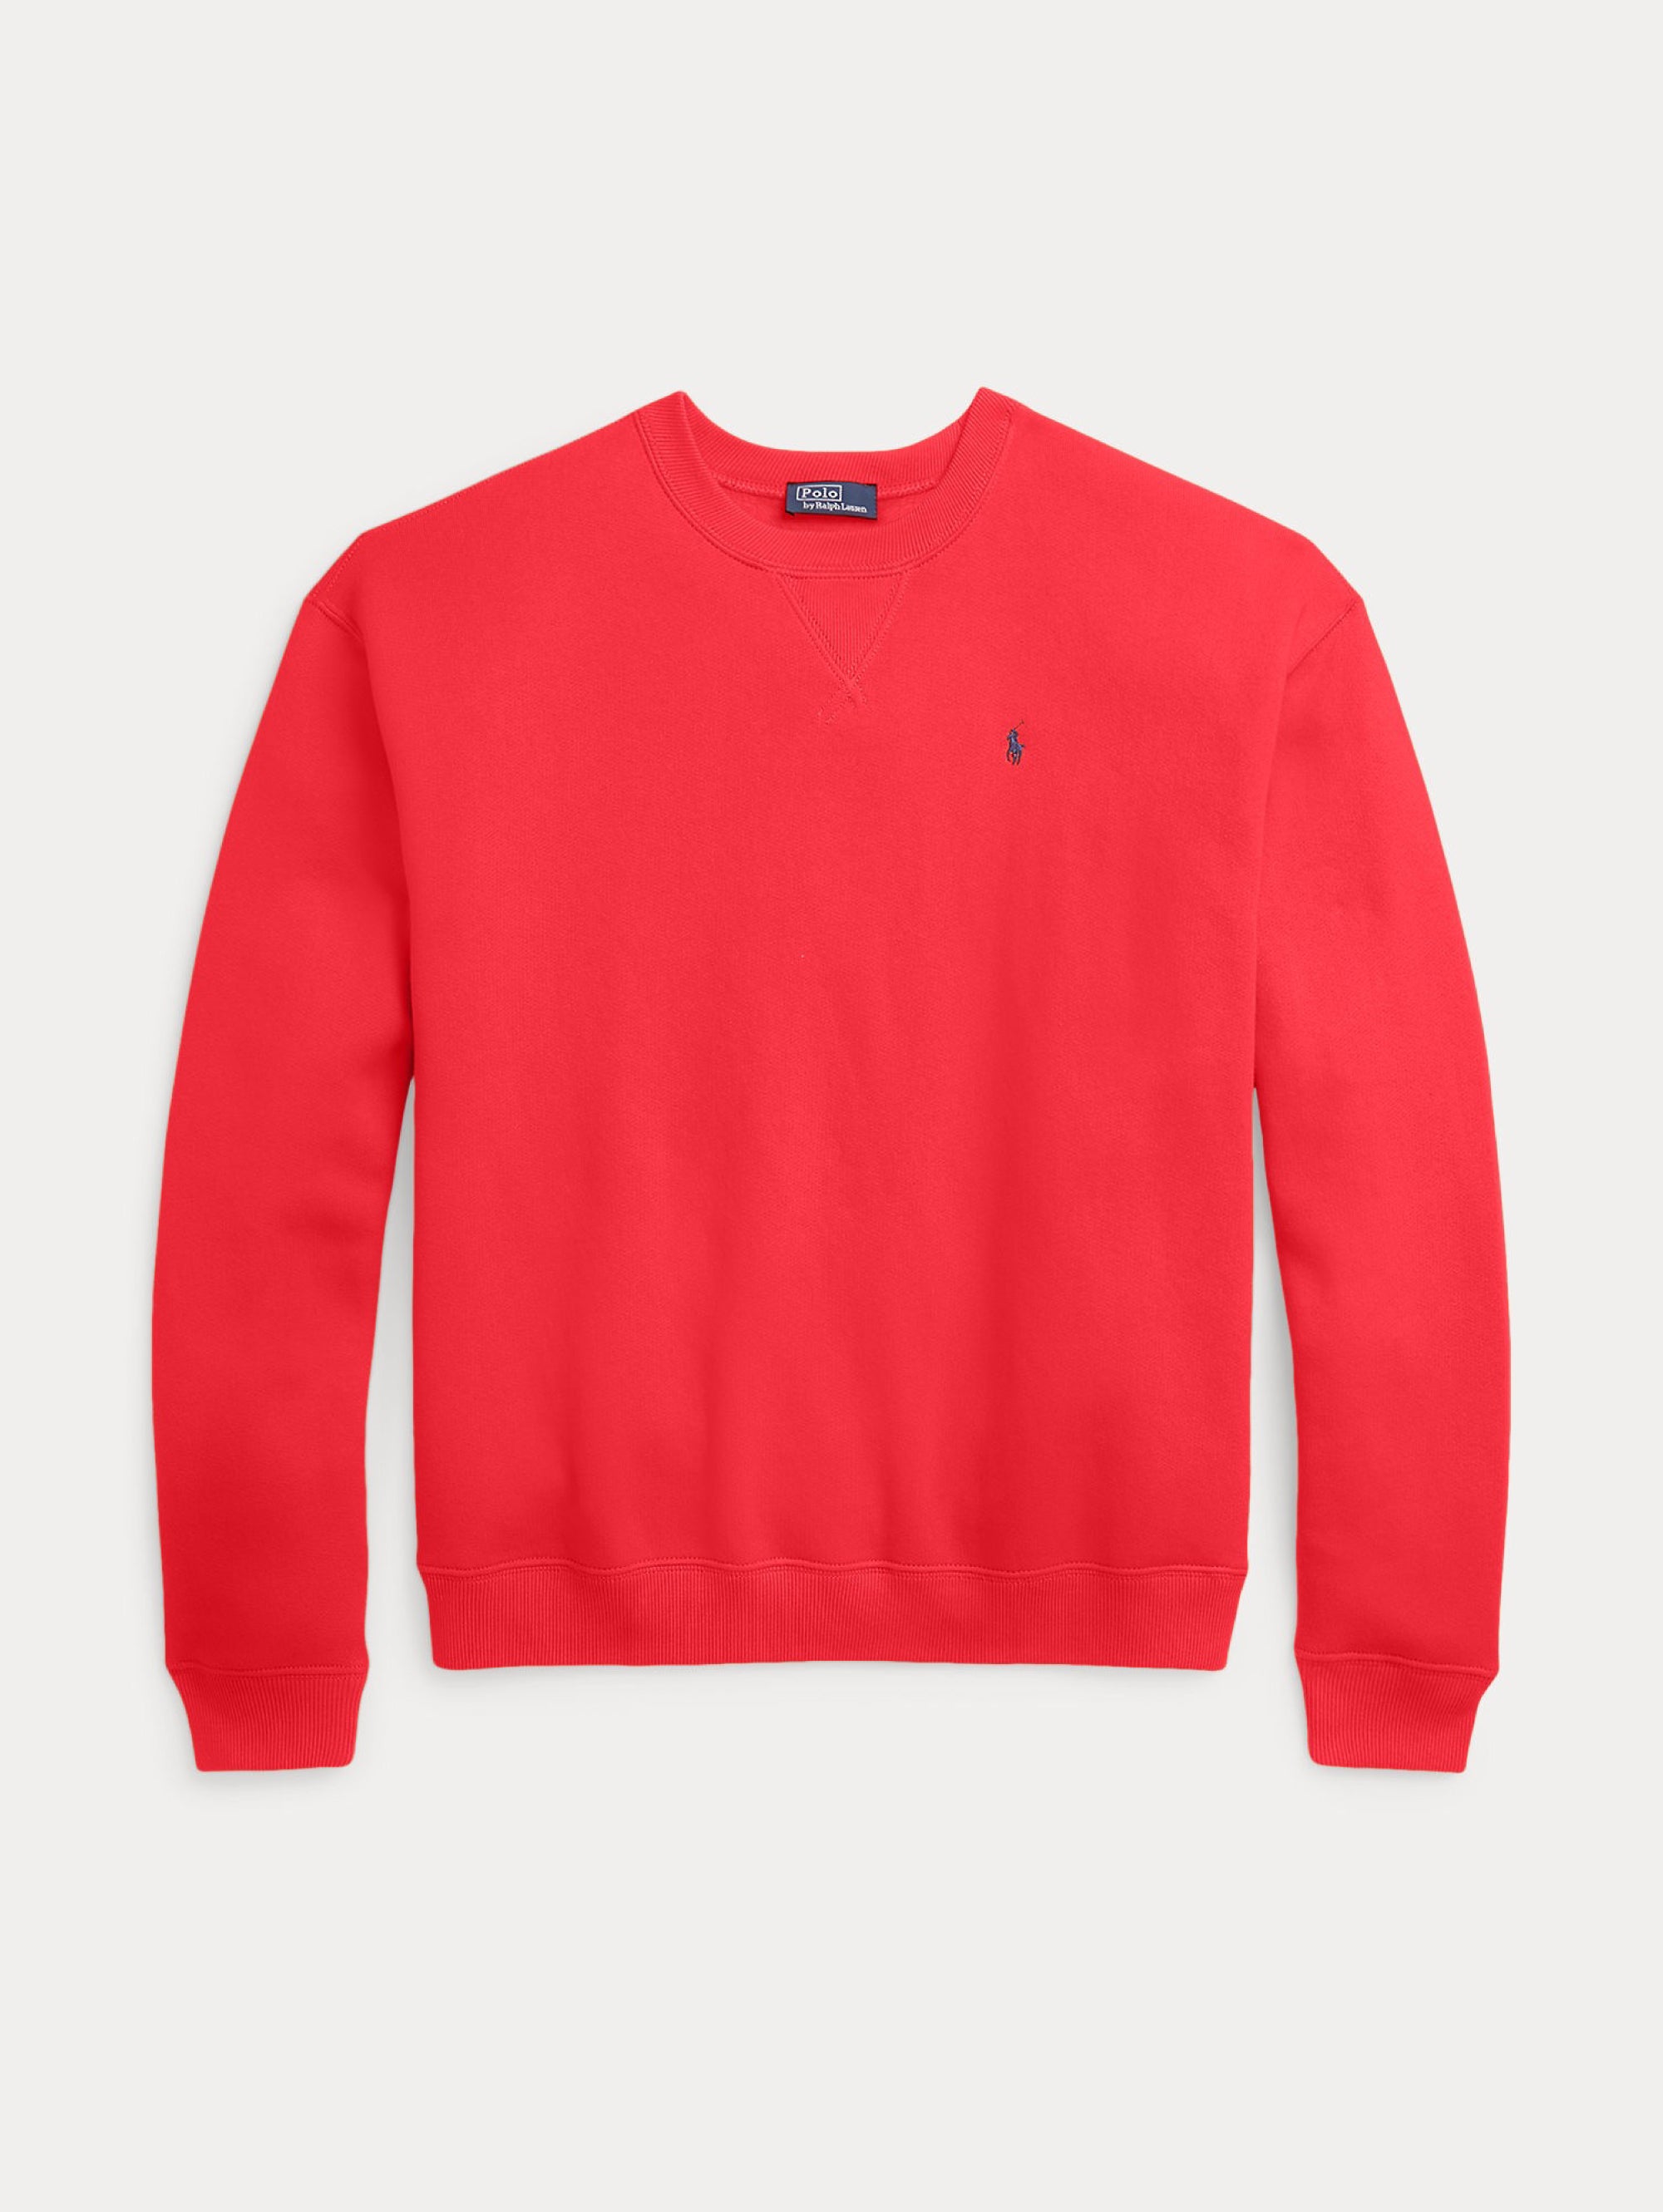 Relaxed Fit Red Crewneck Sweatshirt